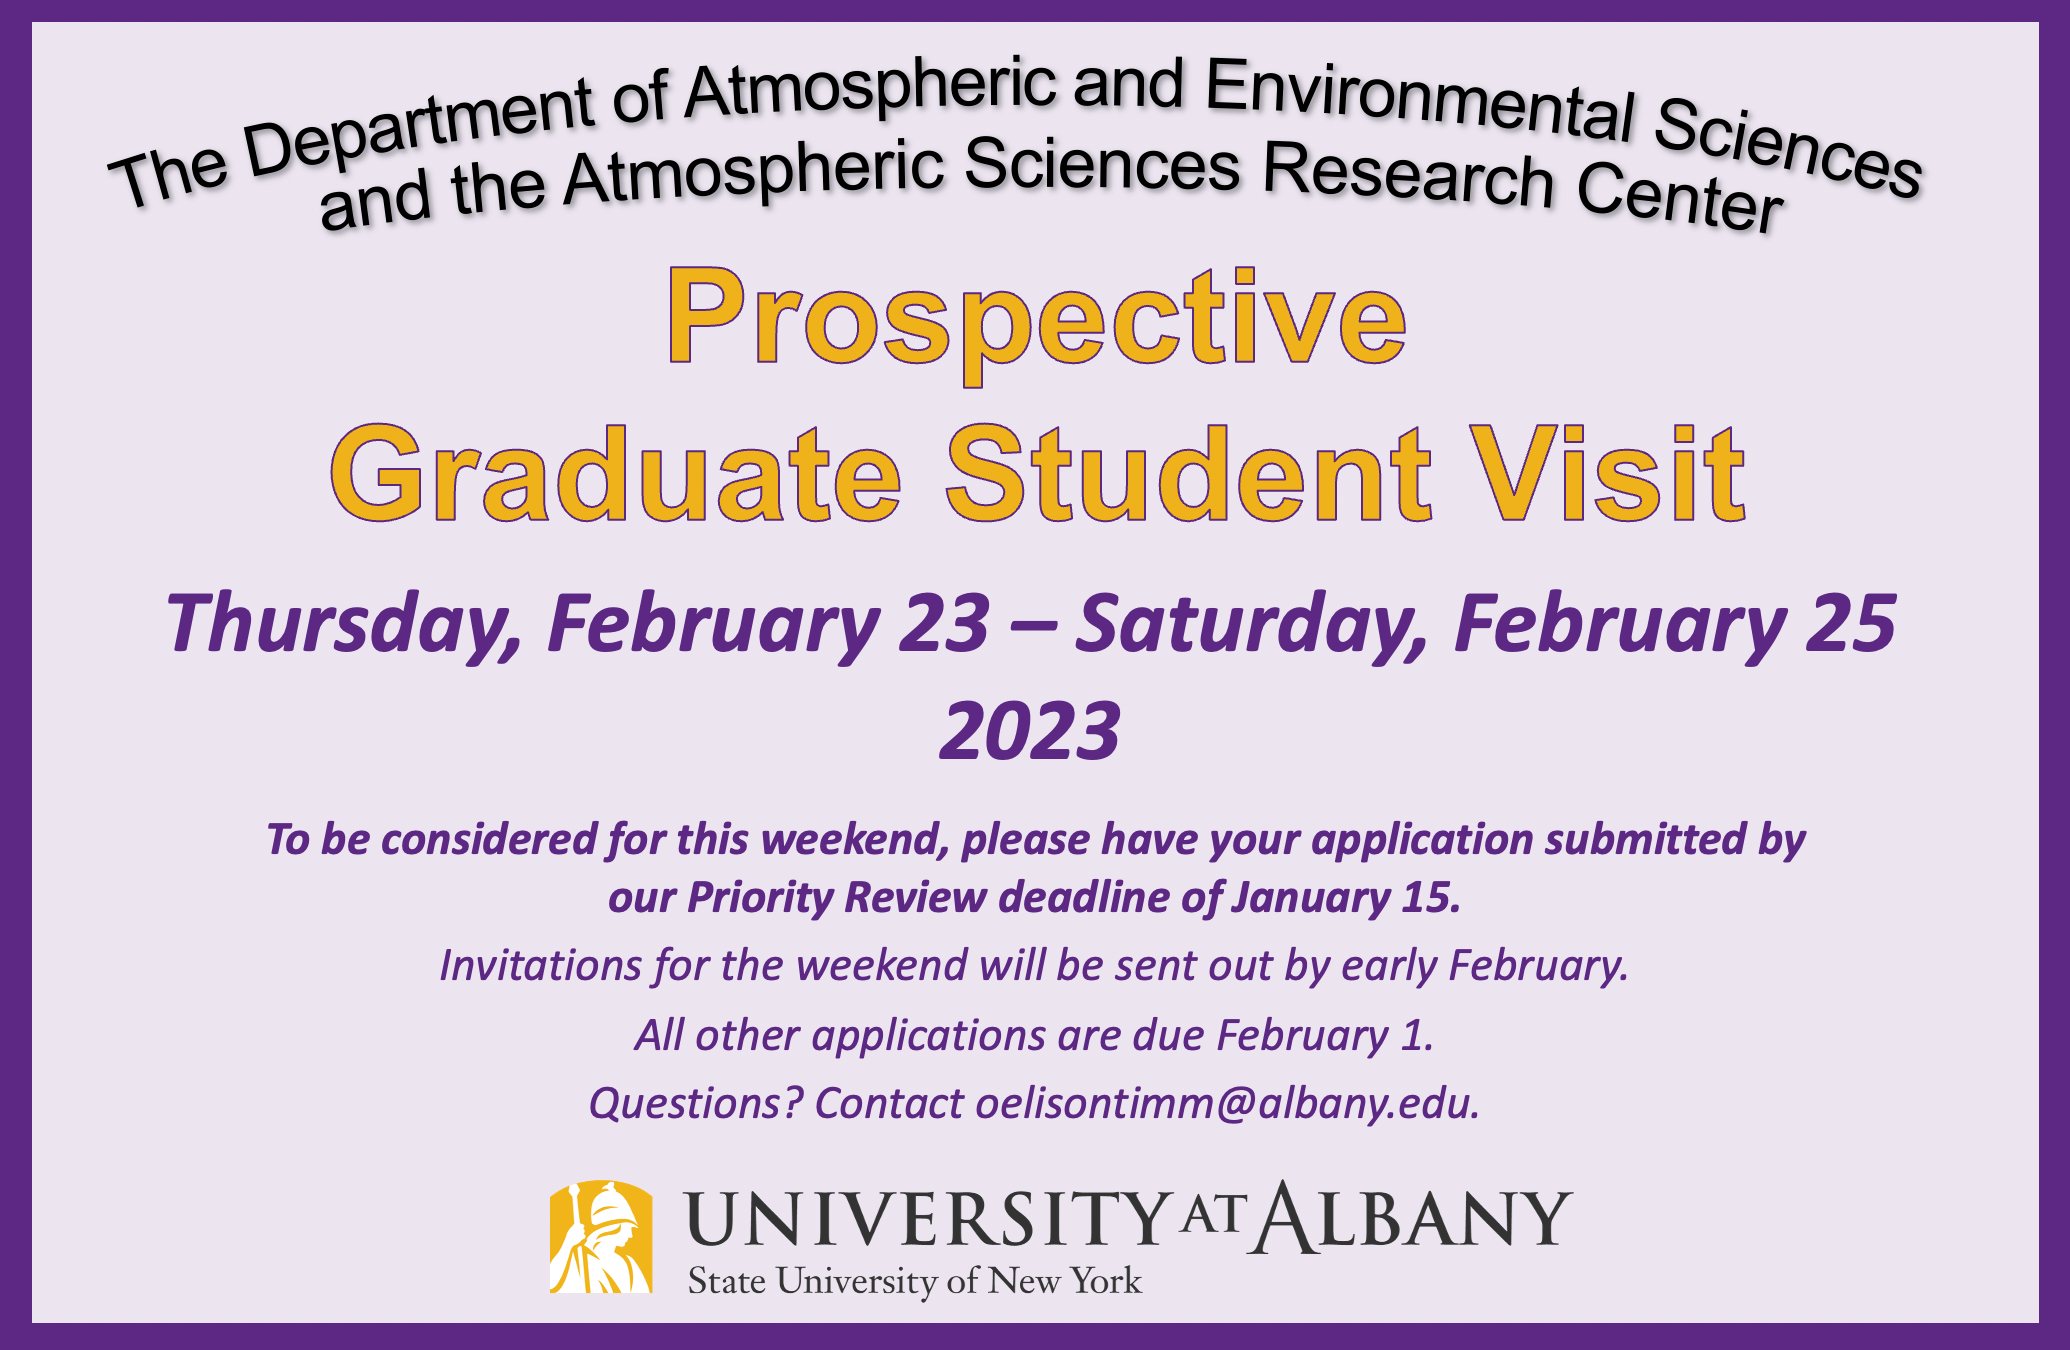 ASRC Prospective Graduate Student Visiting Weekend